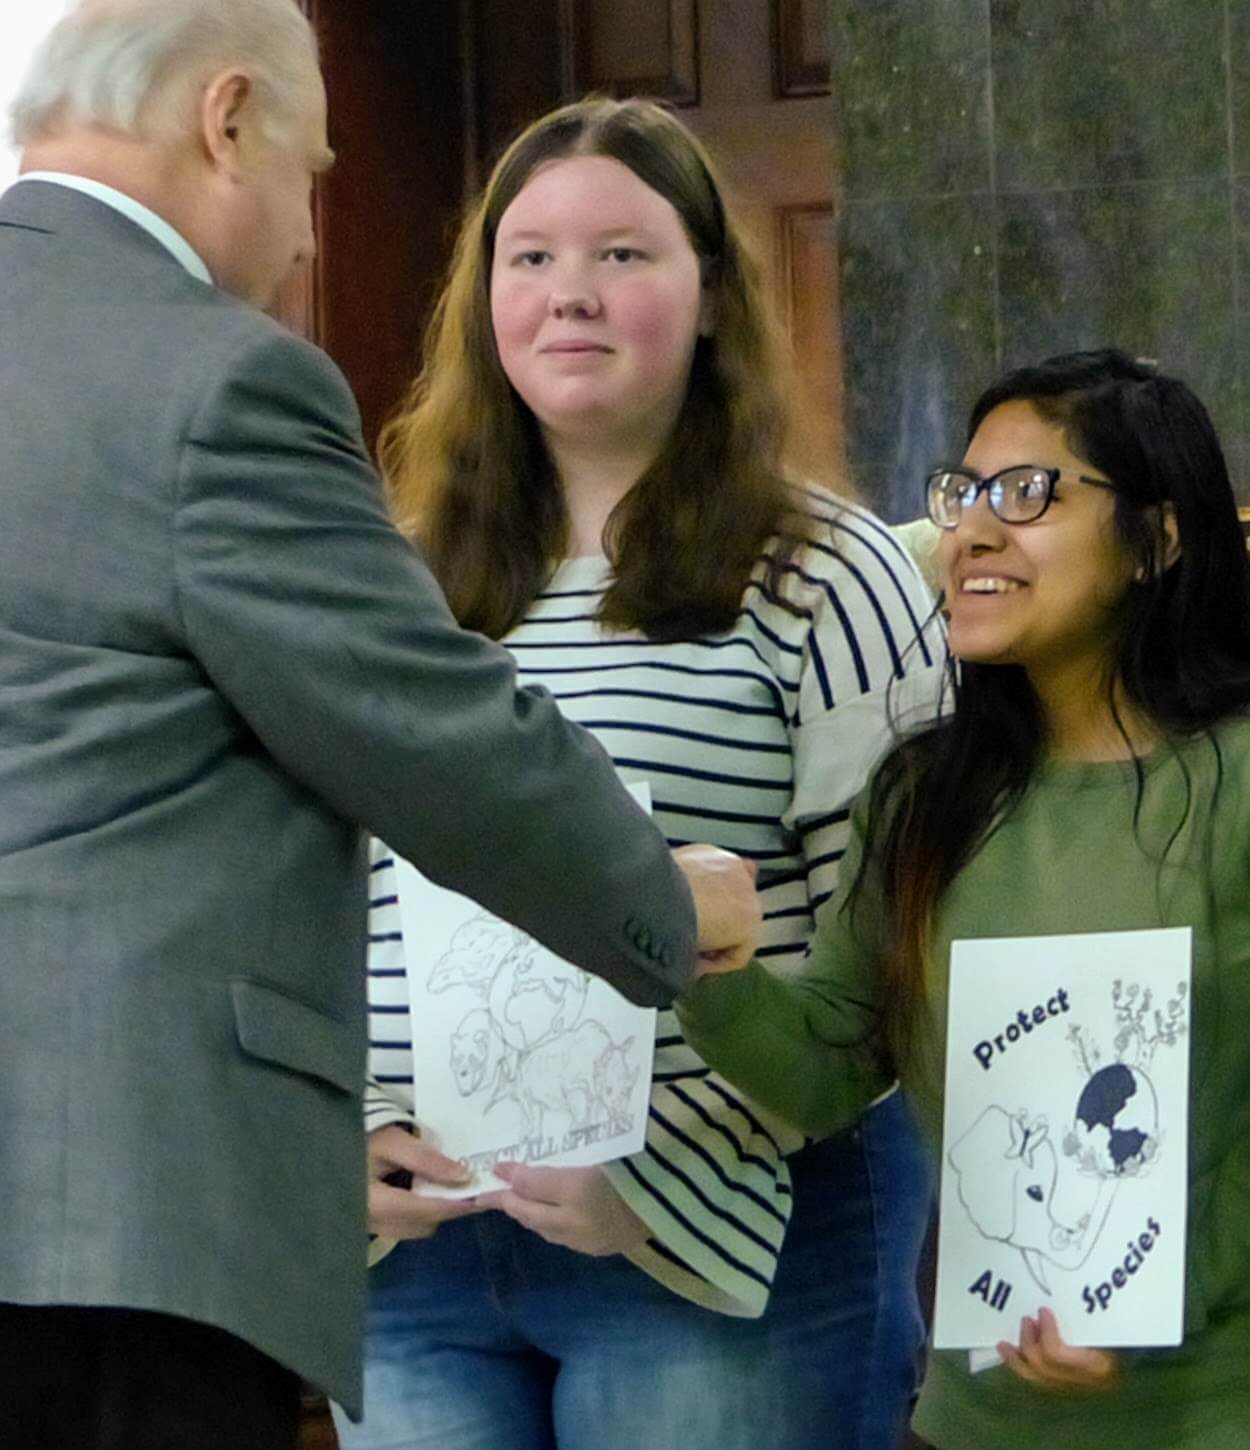 Freeholder Director Gerald Thornton congratulates Odalys Mendoza April 9 for winning first place in the 2019 Earth Day logo contest. Her artwork will be featured on T-shirts at the April 20 celebration. Second-place winner Amber Moore also received congratulations. Moore and Mendoza are students at Cape May County Technical School. Absent was third-place winner Brooke Middleton of Ocean City Intermediate School.